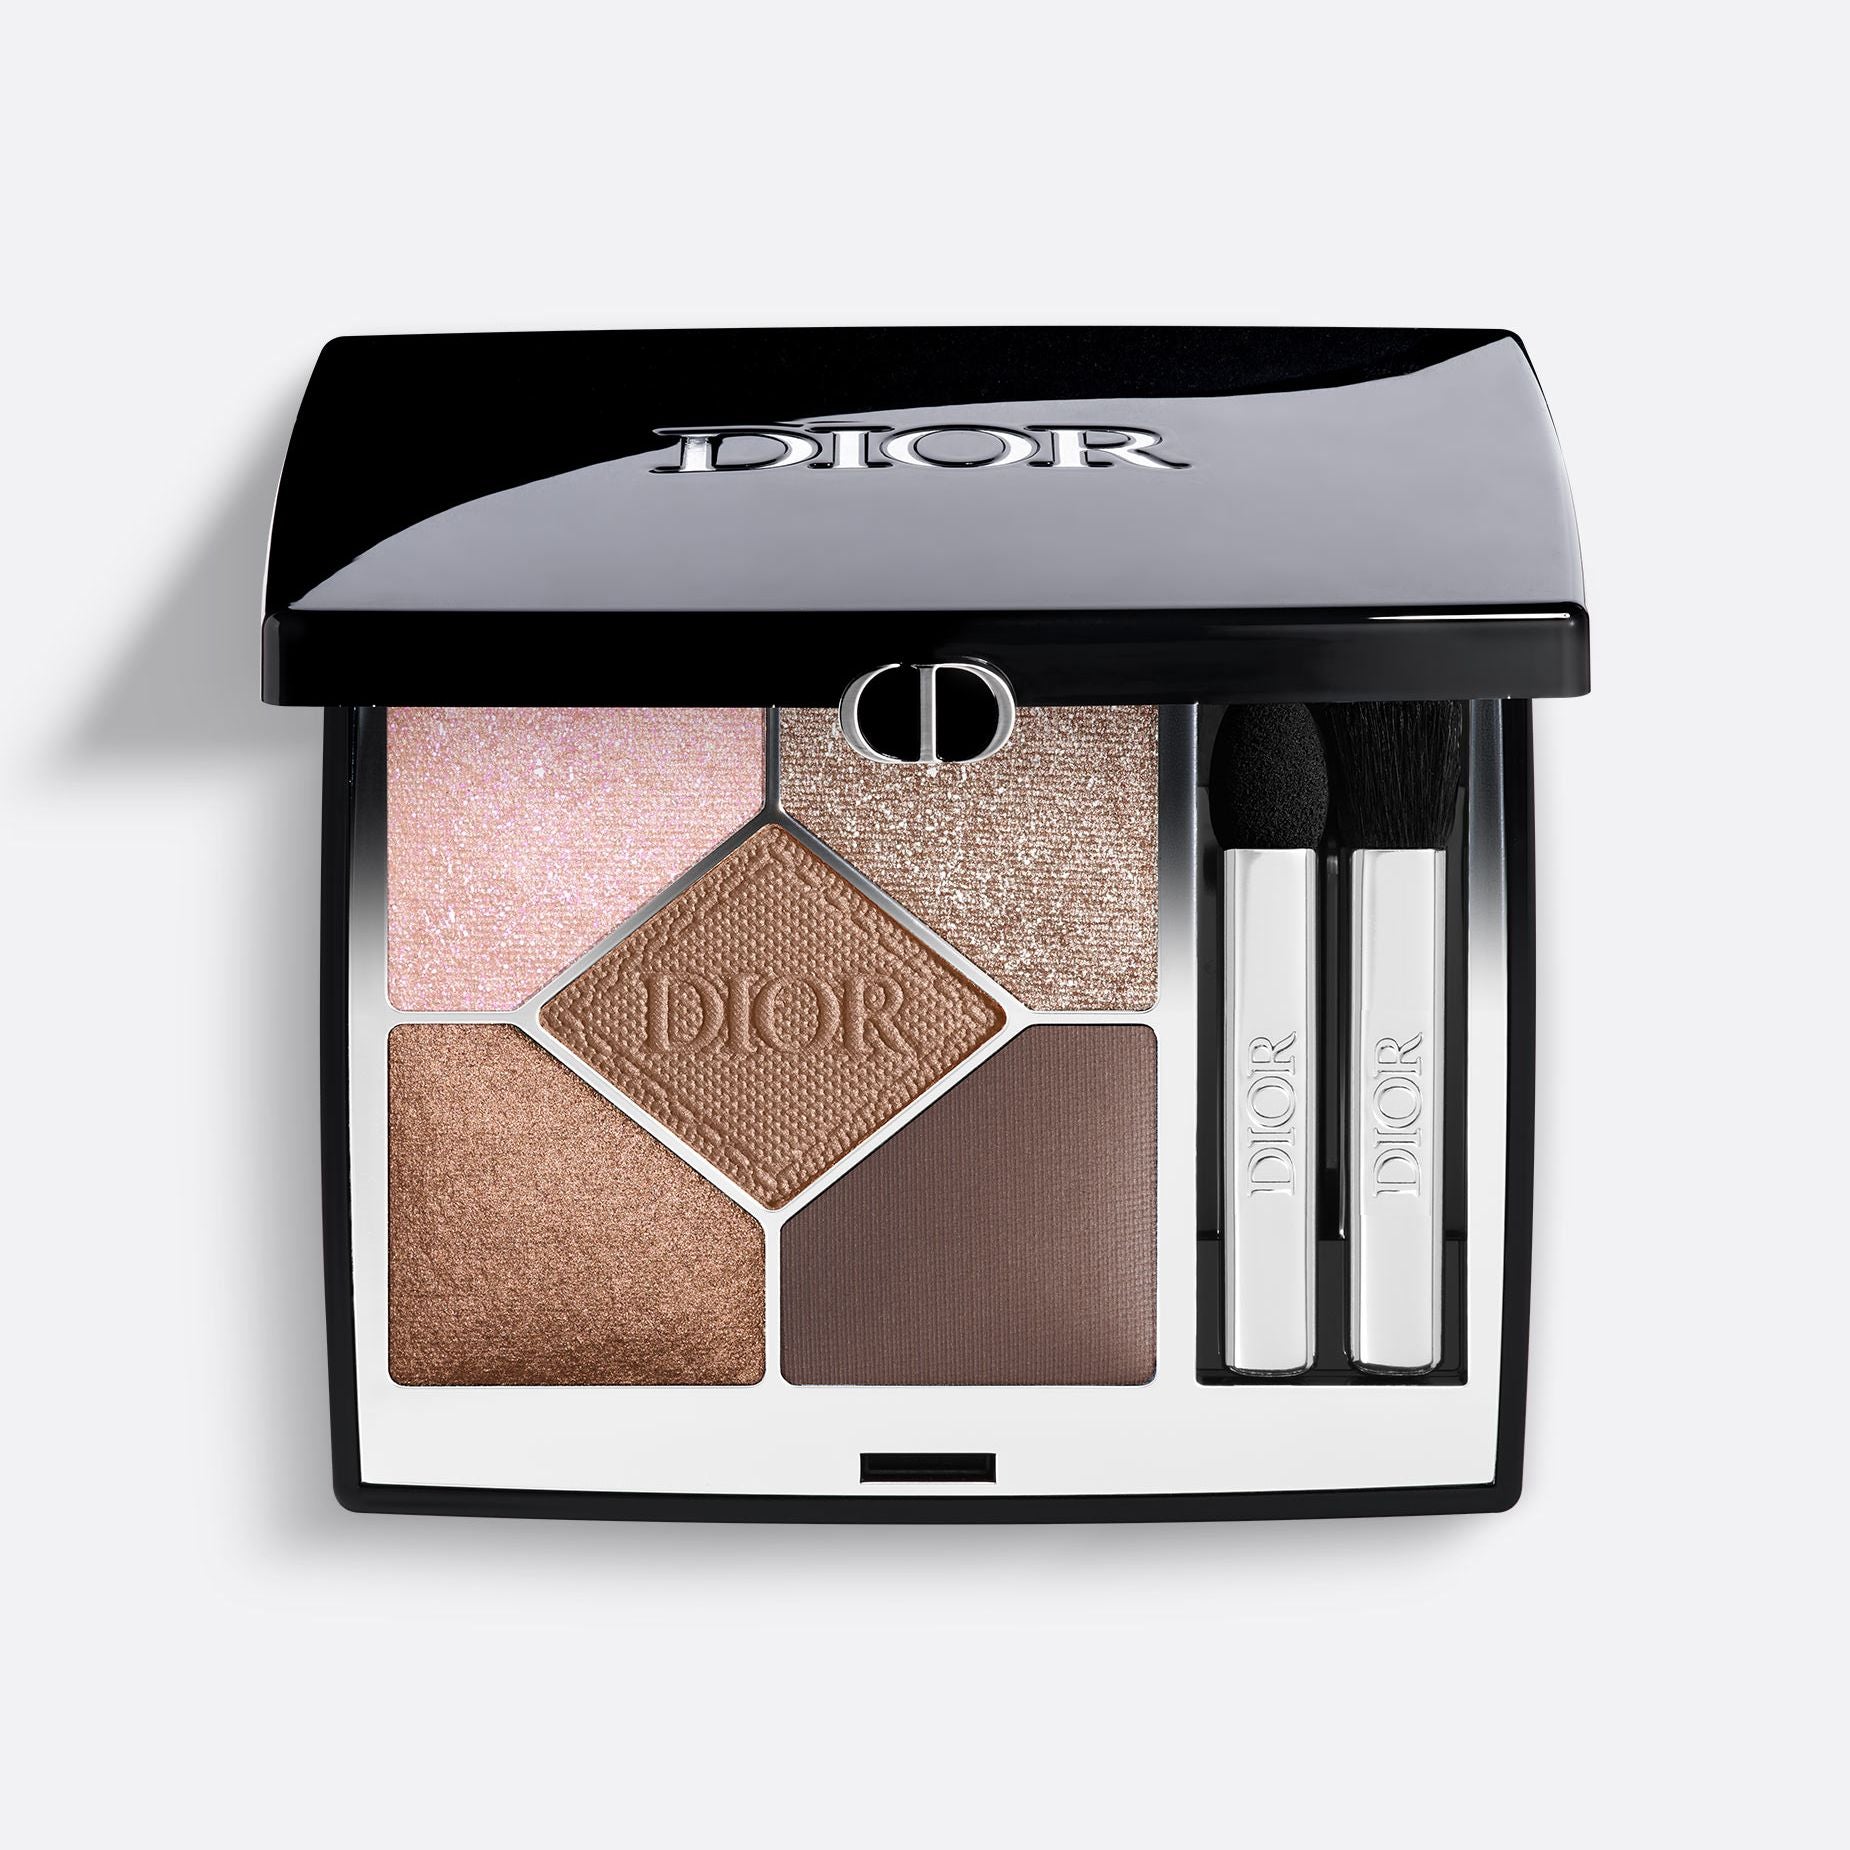 DIORSHOW 5 COULEURS ~ Eye Palette - 5 Eyeshadows - High Color and Long Wear